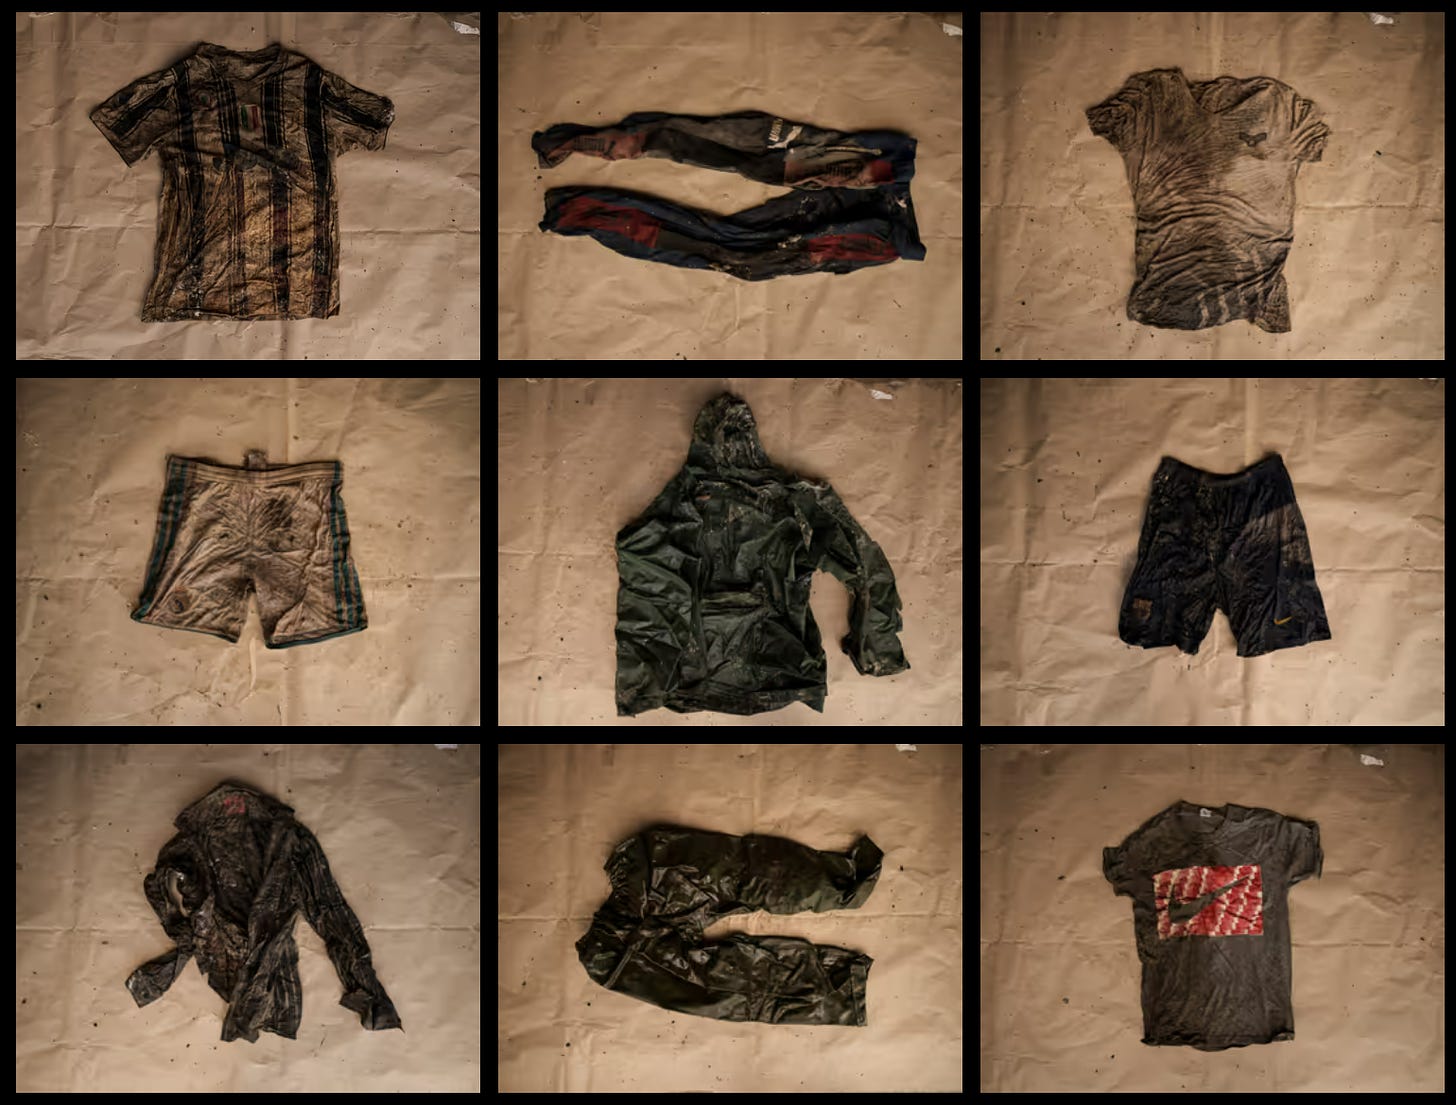 A collage of dirty jackets and shorts worn my Mauritanian migrants 